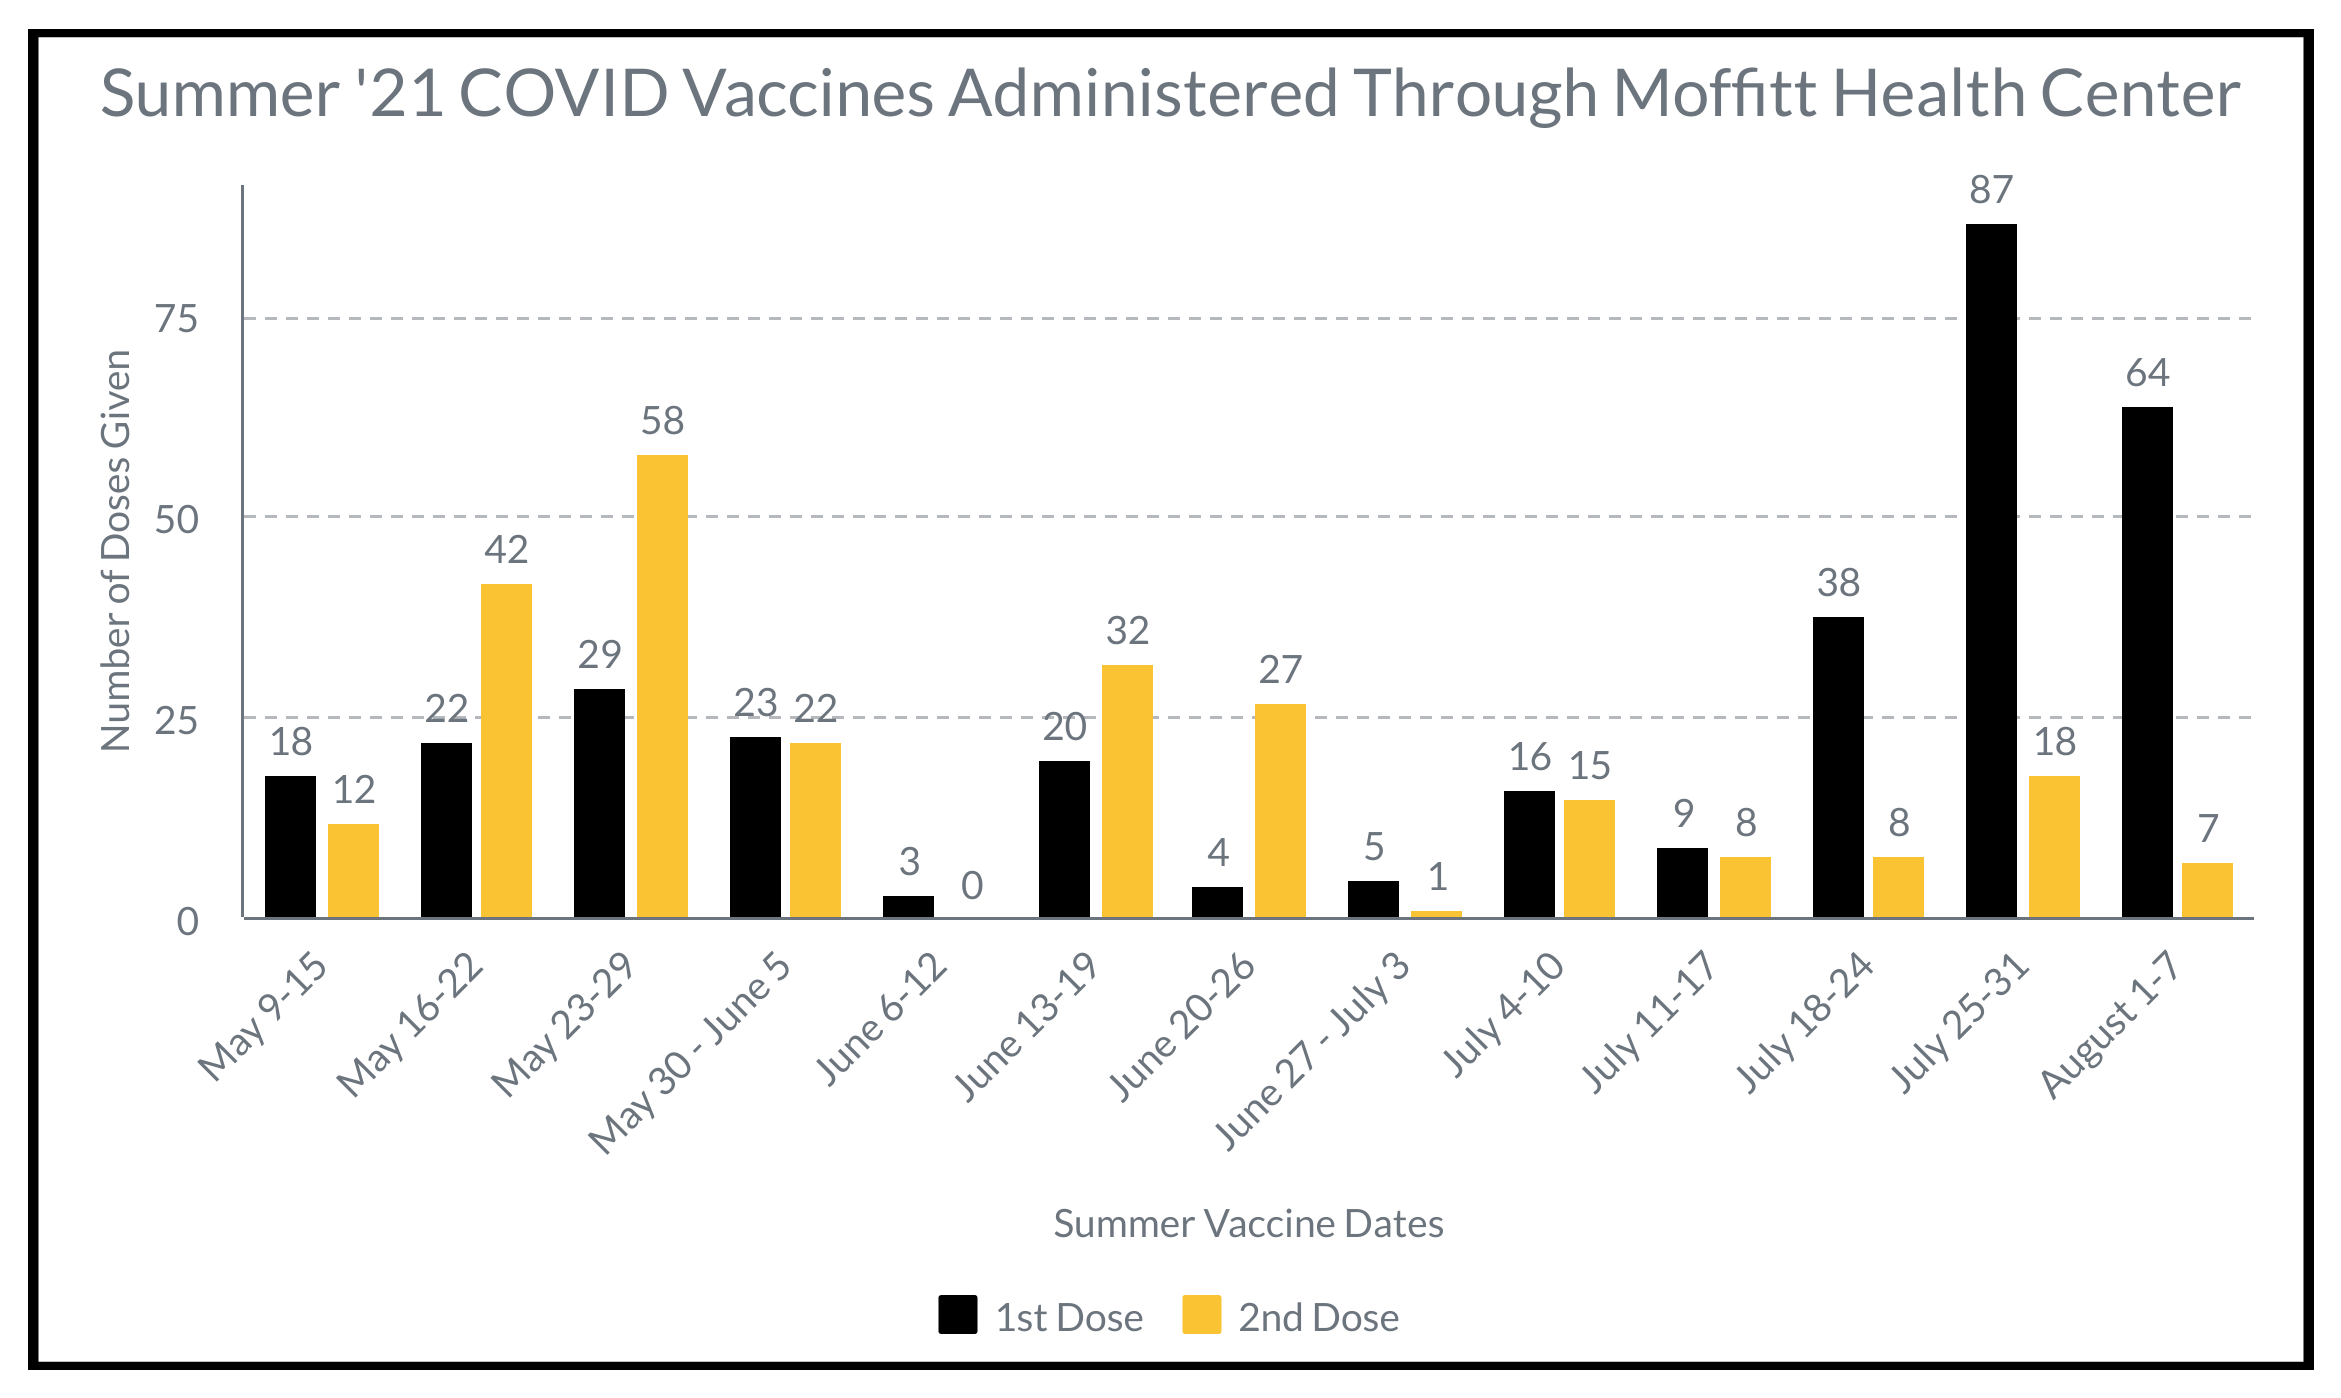 COVID Vaccinces Administered at MHC in Summer of 2021